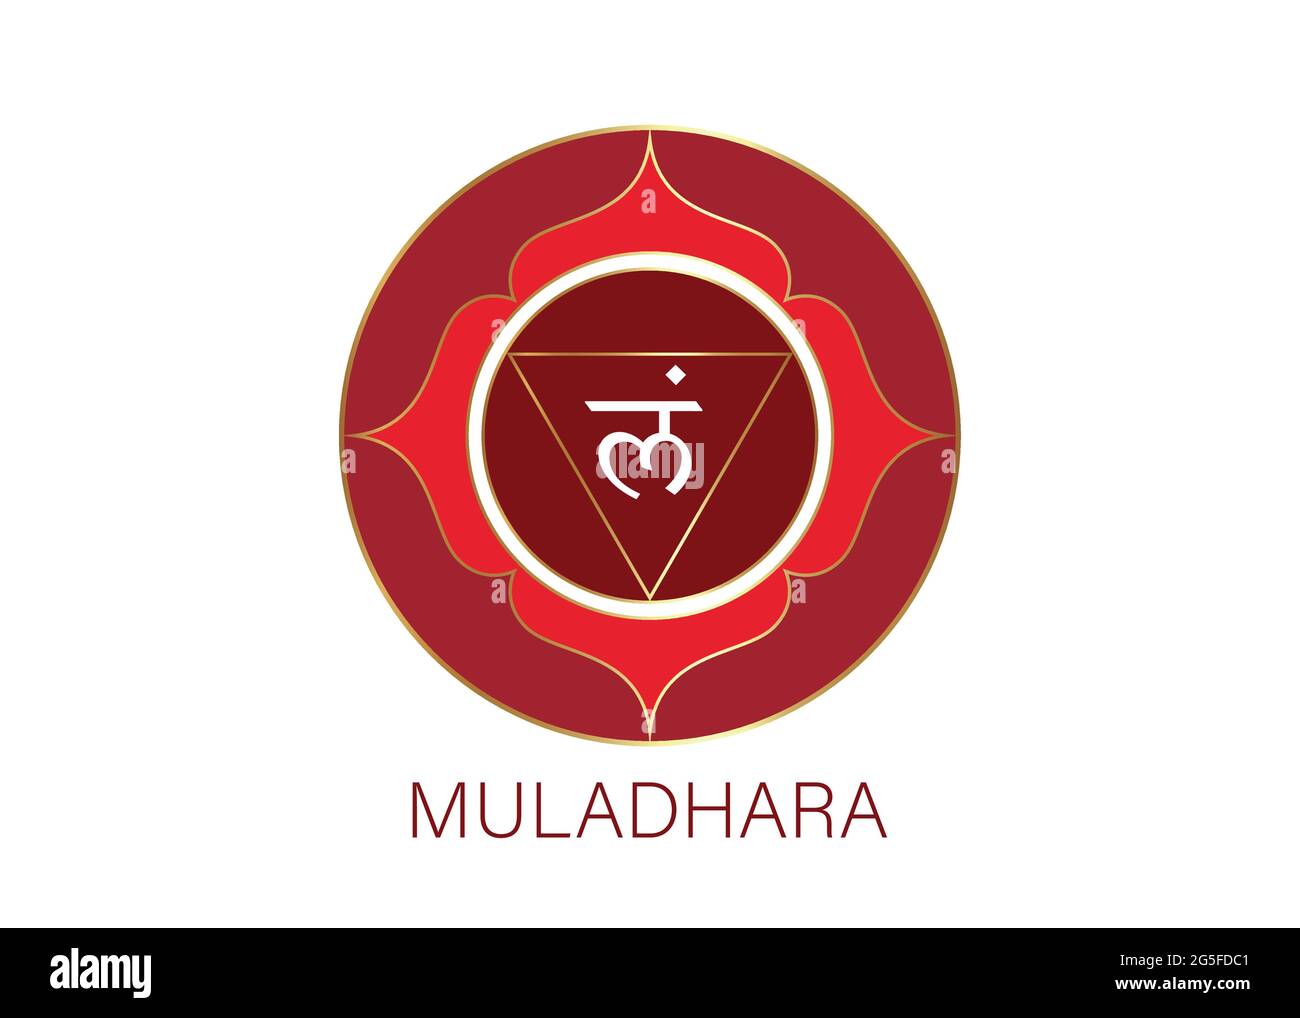 Muladhara chakra logo template. First root chakra symbol. Red sacral sign meditation, yoga round mandala icon vector isolated on white background Stock Vector